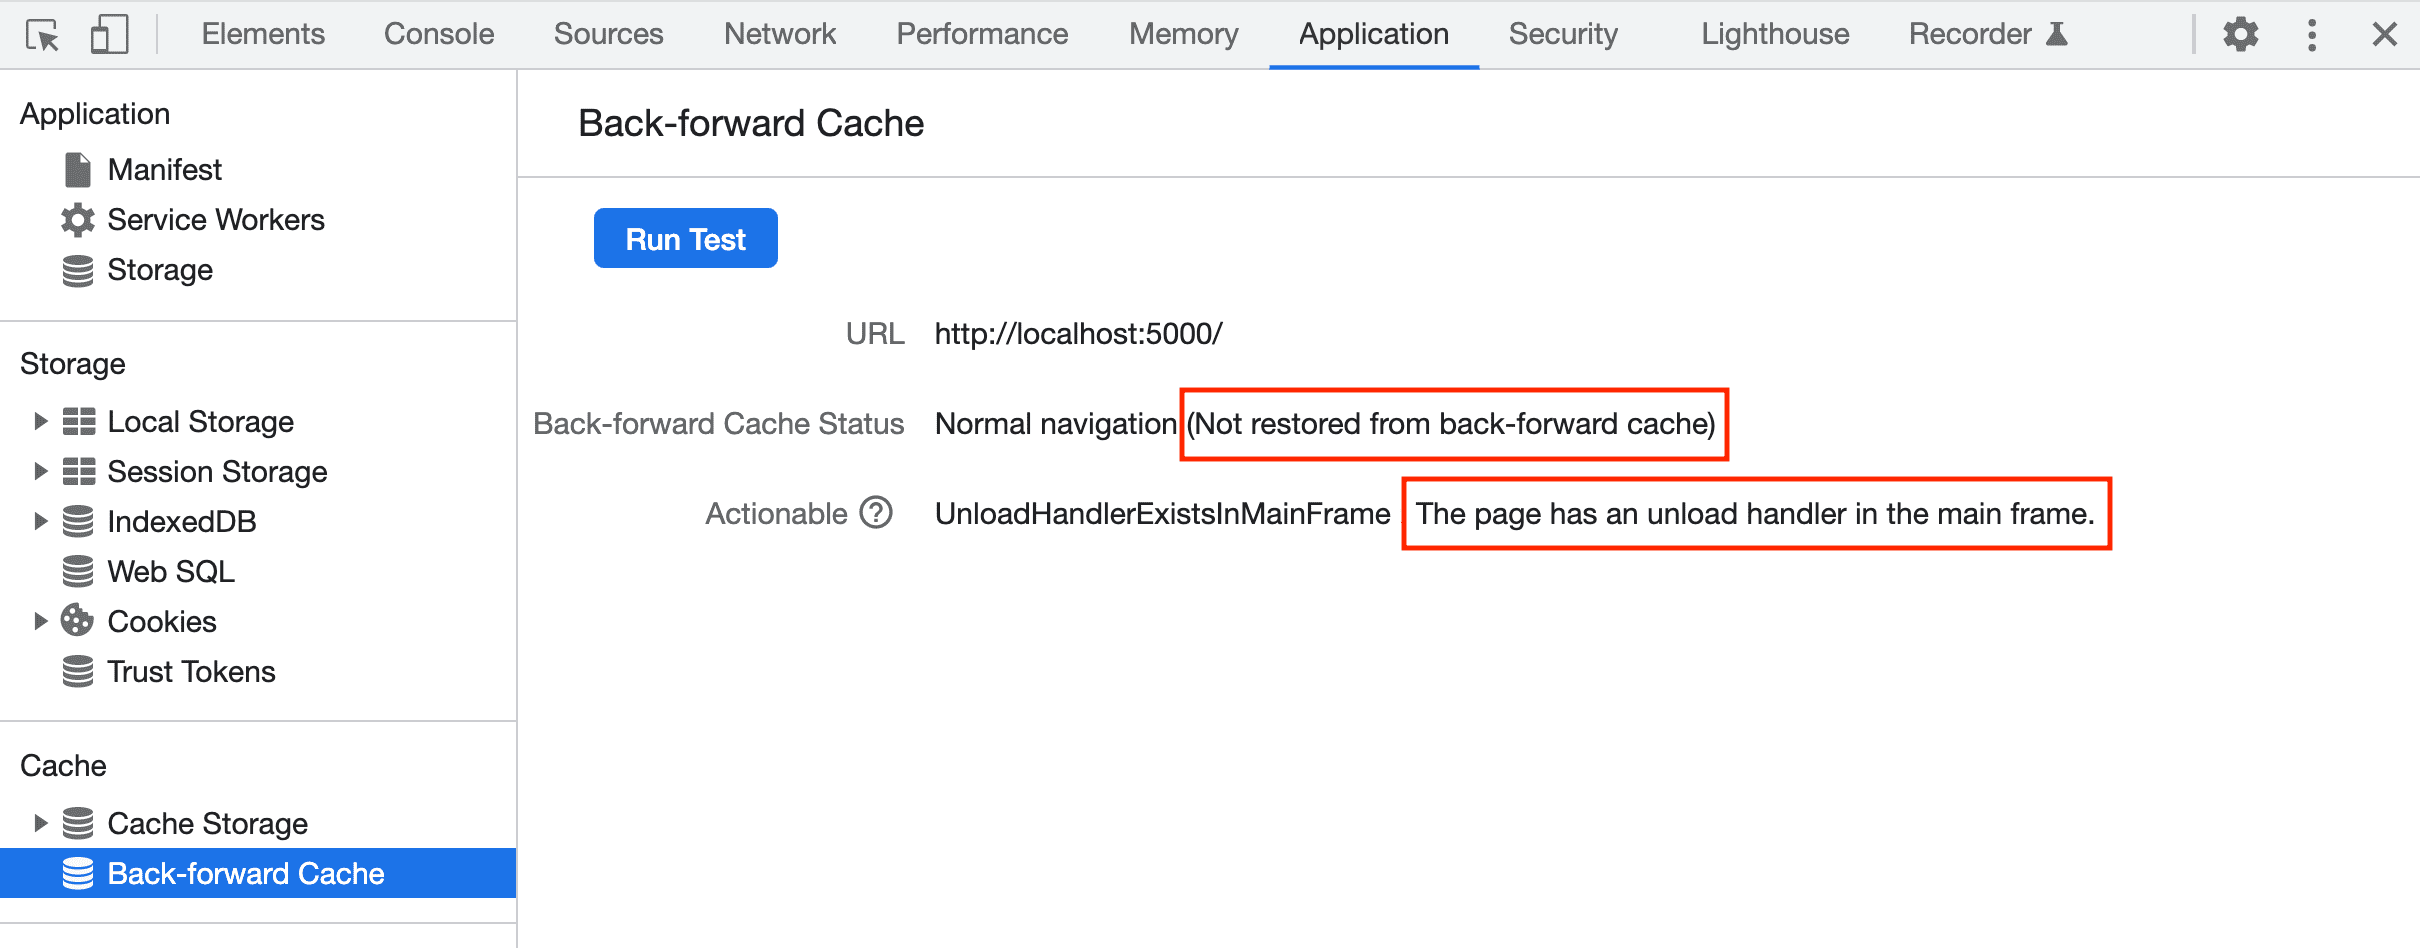 DevTools reporting failure to restore a page from bfcache